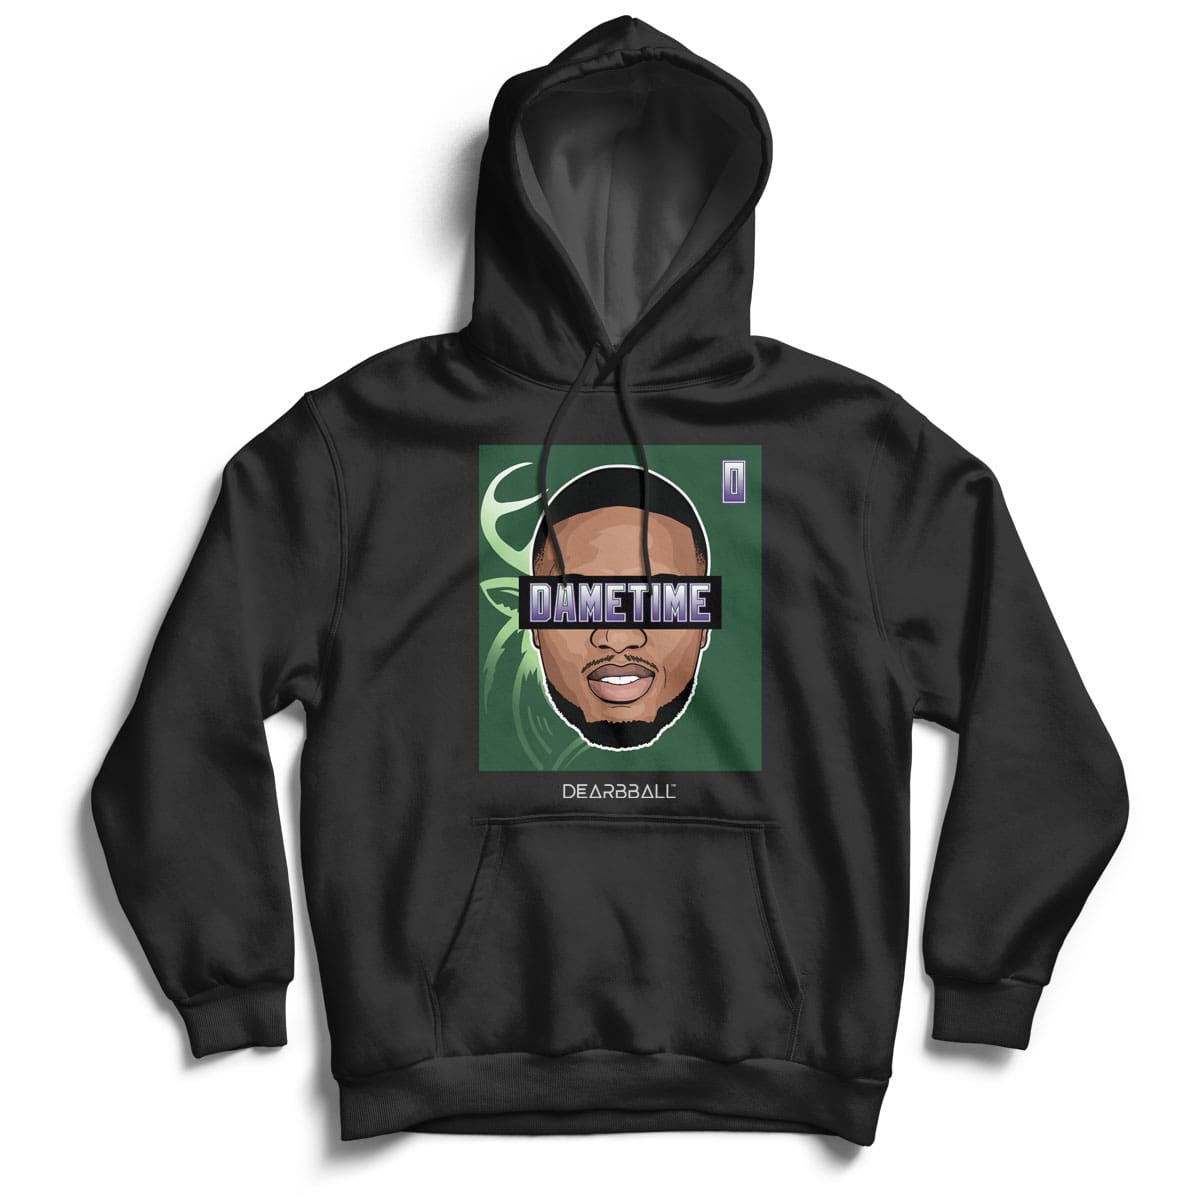 DearBBall Hoodie - DameTime Throwback 0 Edition